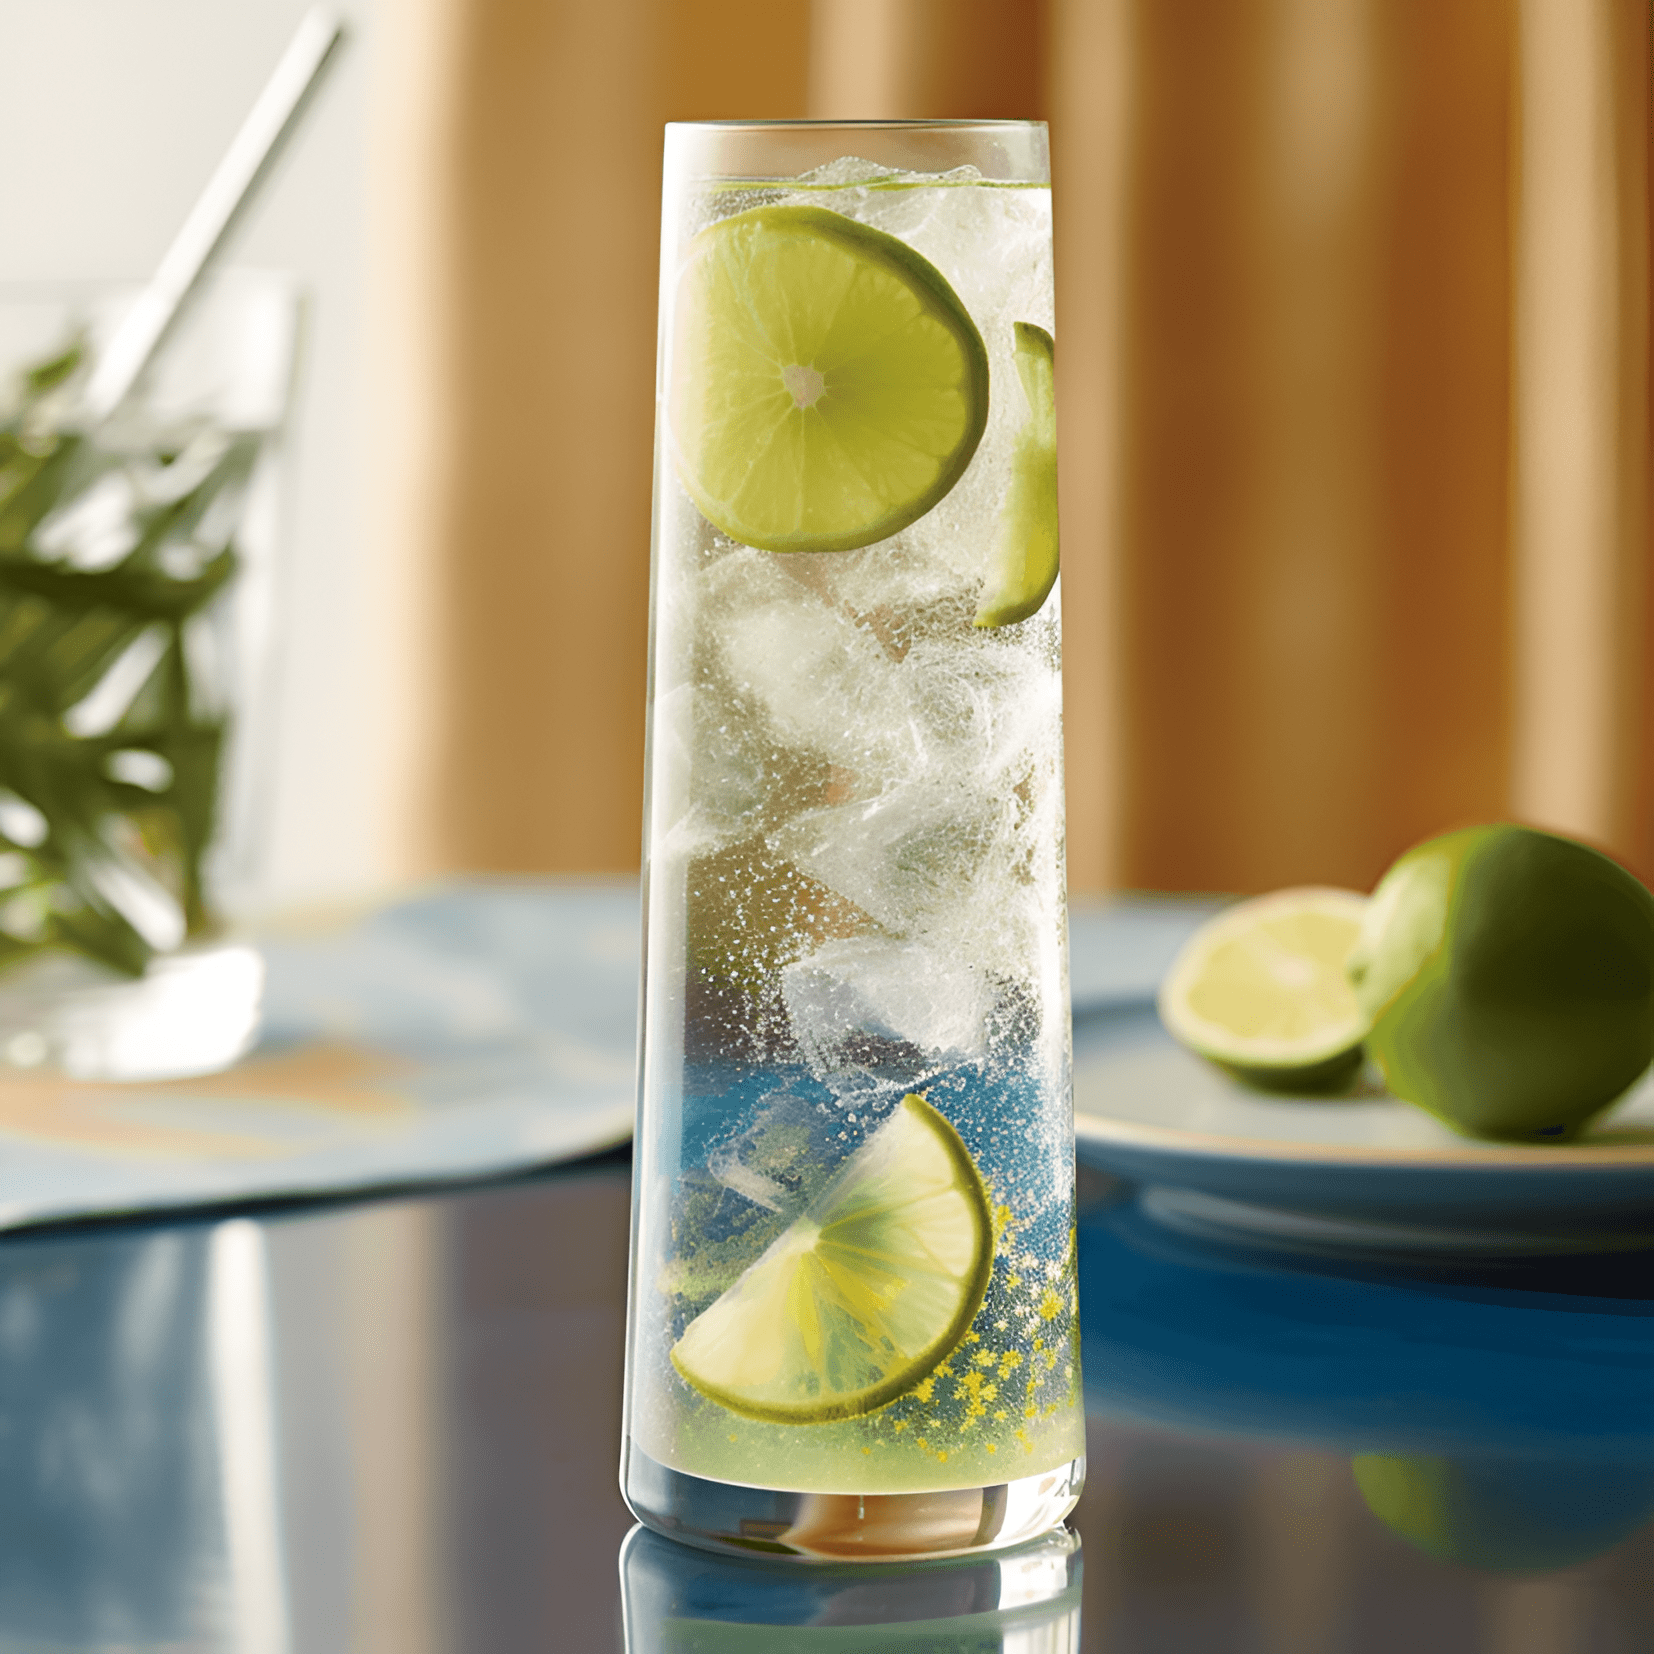 Wine Cooler Cocktail Recipe - The Wine Cooler cocktail has a fruity, refreshing, and slightly sweet taste. It is light and easy to drink, with a subtle hint of wine and a pleasant mix of fruit flavors.